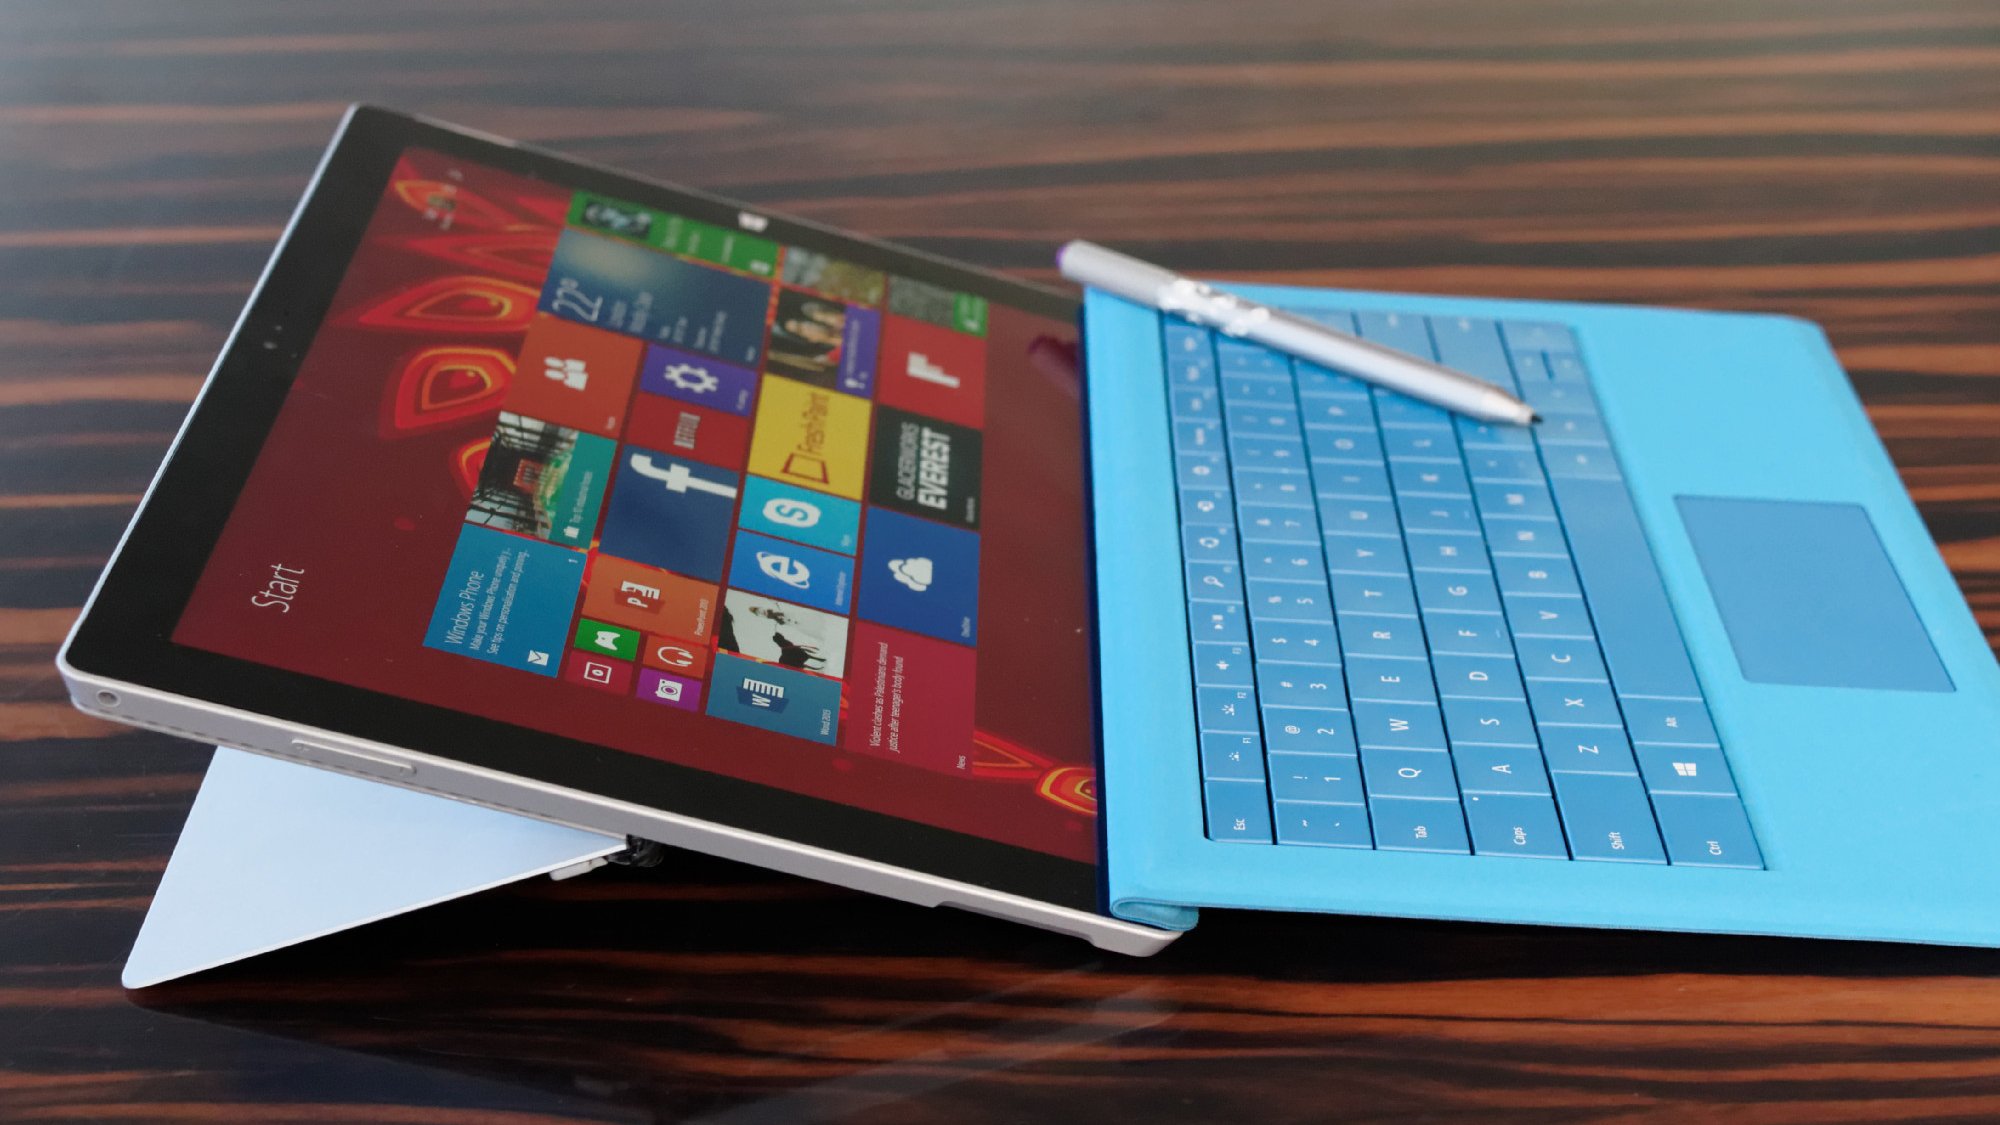 Microsoft Surface Pro 3 review: The Surface that got it right